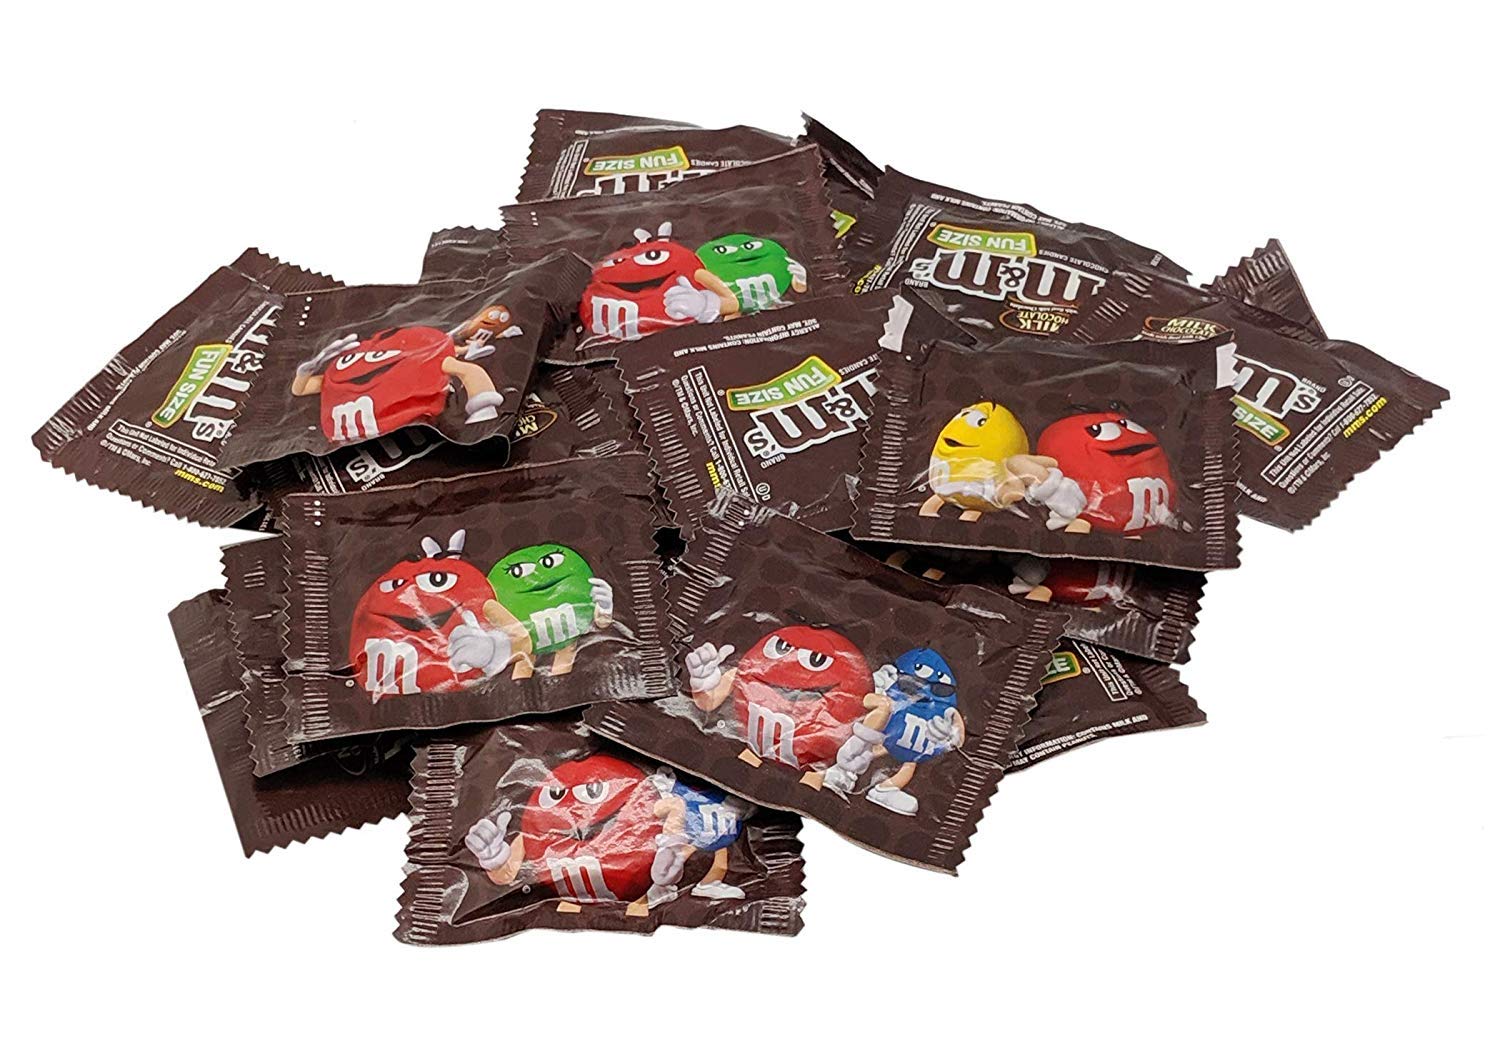 Save on M&M's Minis Milk Chocolate Candies Sharing Size Order